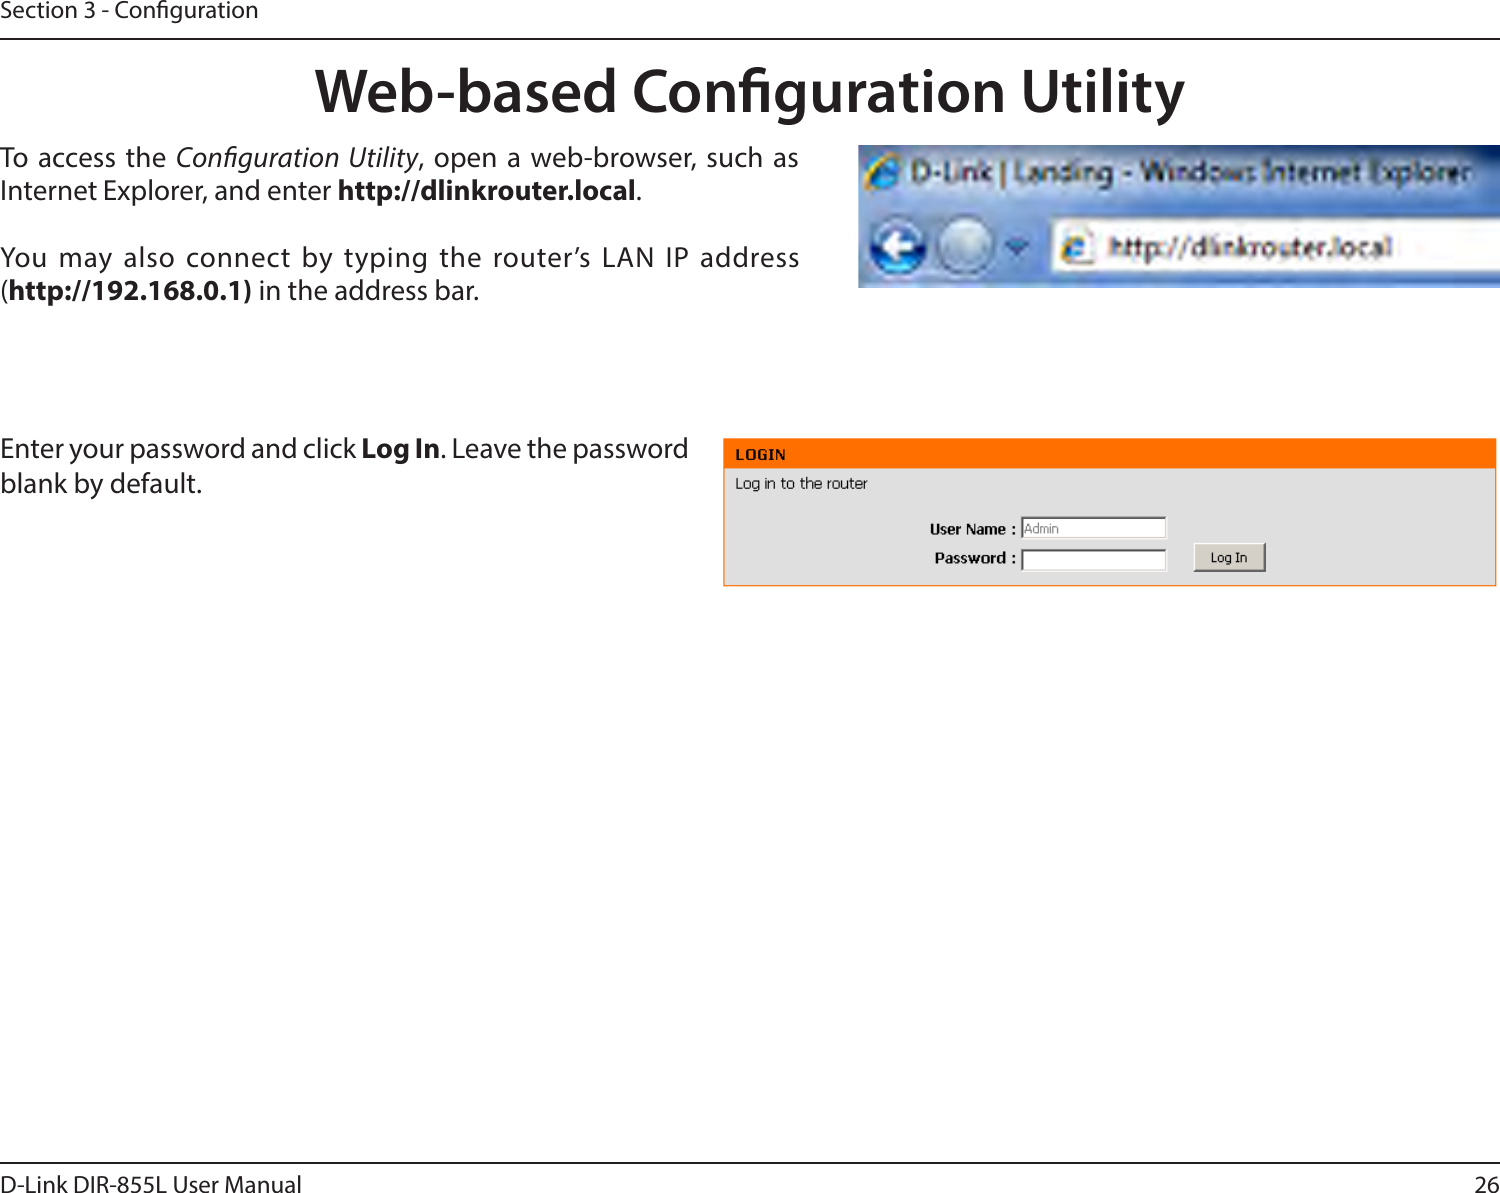 26D-Link DIR-855L User ManualSection 3 - CongurationWeb-based Conguration UtilityEnter your password and click Log In. Leave the password blank by default.To access the Conguration Utility, open a web-browser, such as Internet Explorer, and enter http://dlinkrouter.local.You  may  also  connect  by  typing  the  router’s  LAN  IP  address (http://192.168.0.1) in the address bar.